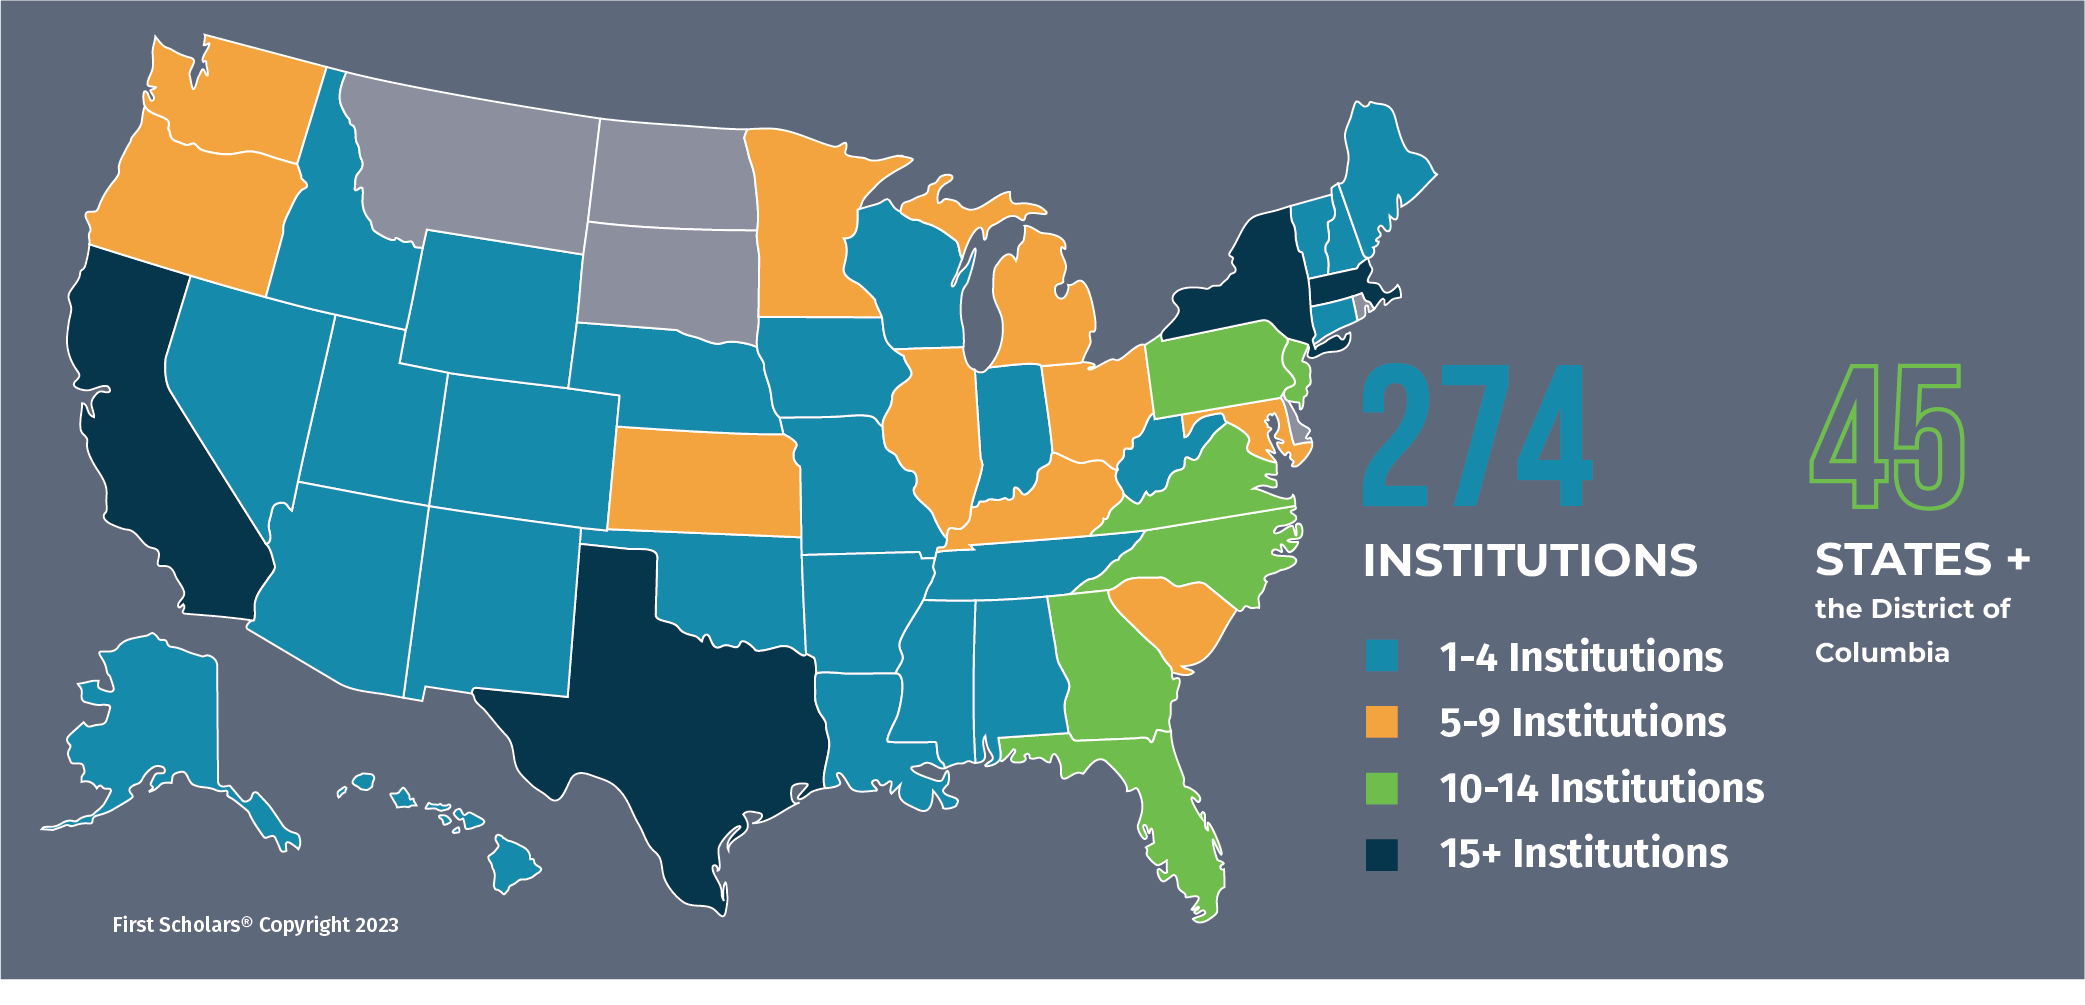 First Scholars Institutional Map showing 274 institutions and 45 states represented 